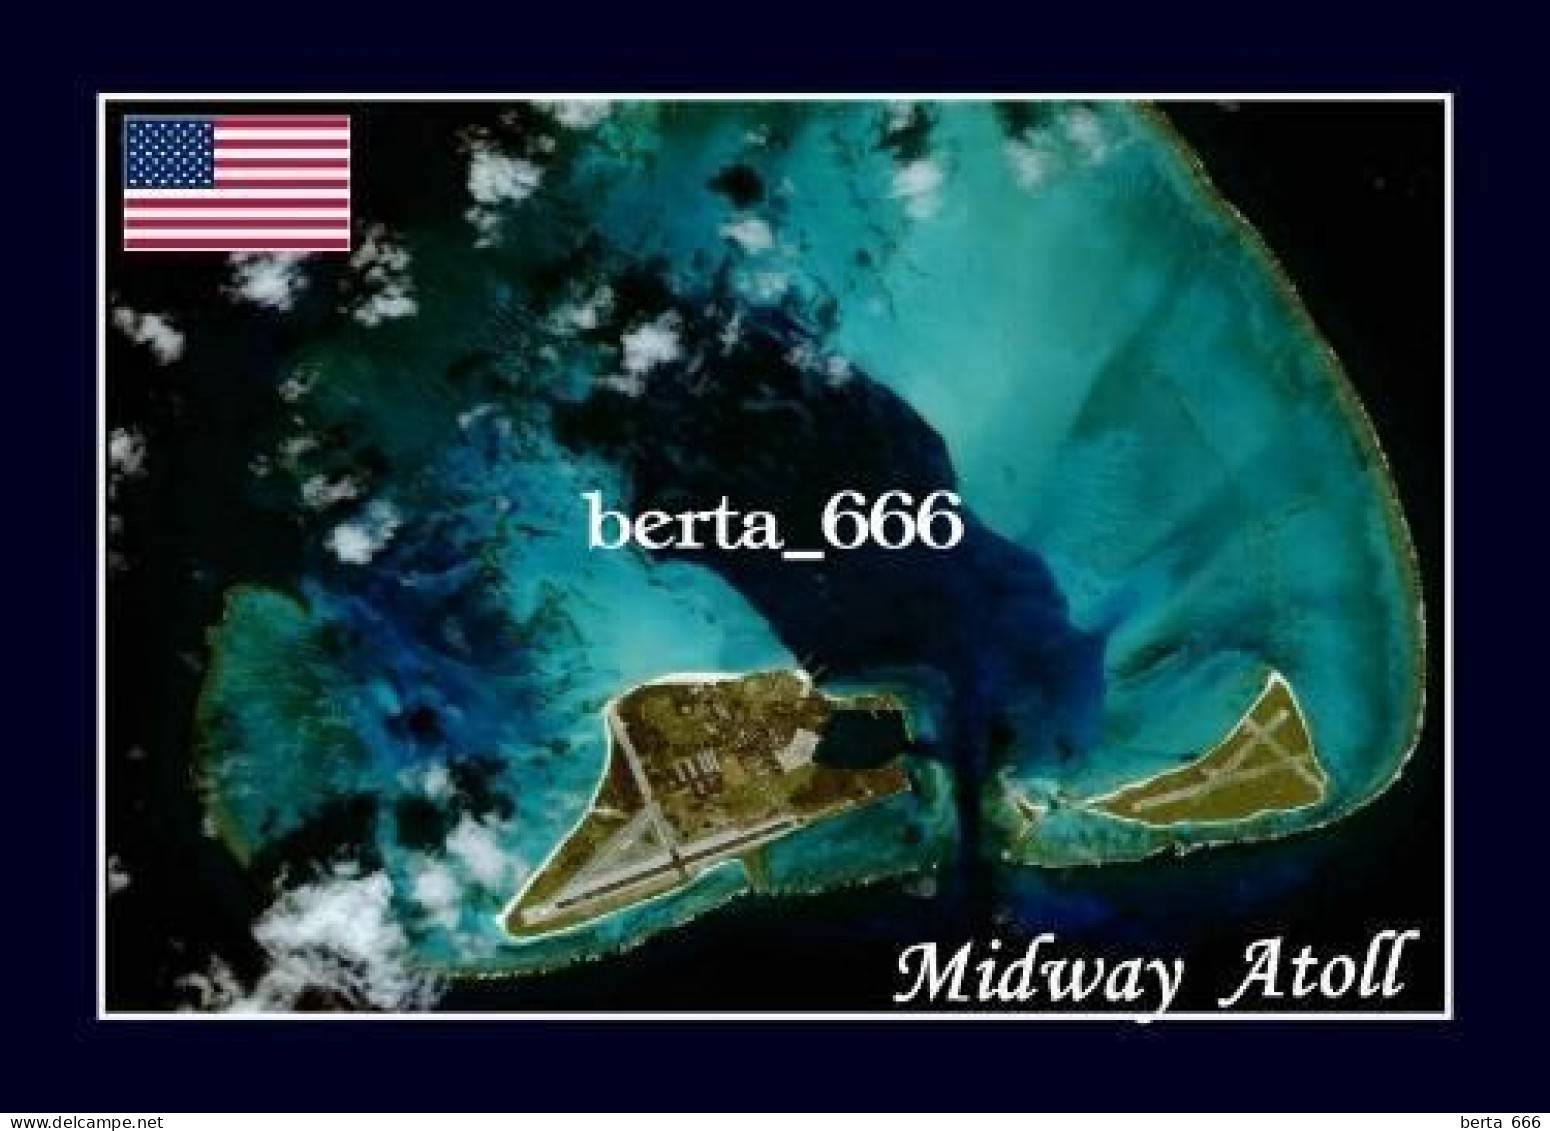 United States Midway Atoll Satellite View New Postcard - Midway Islands